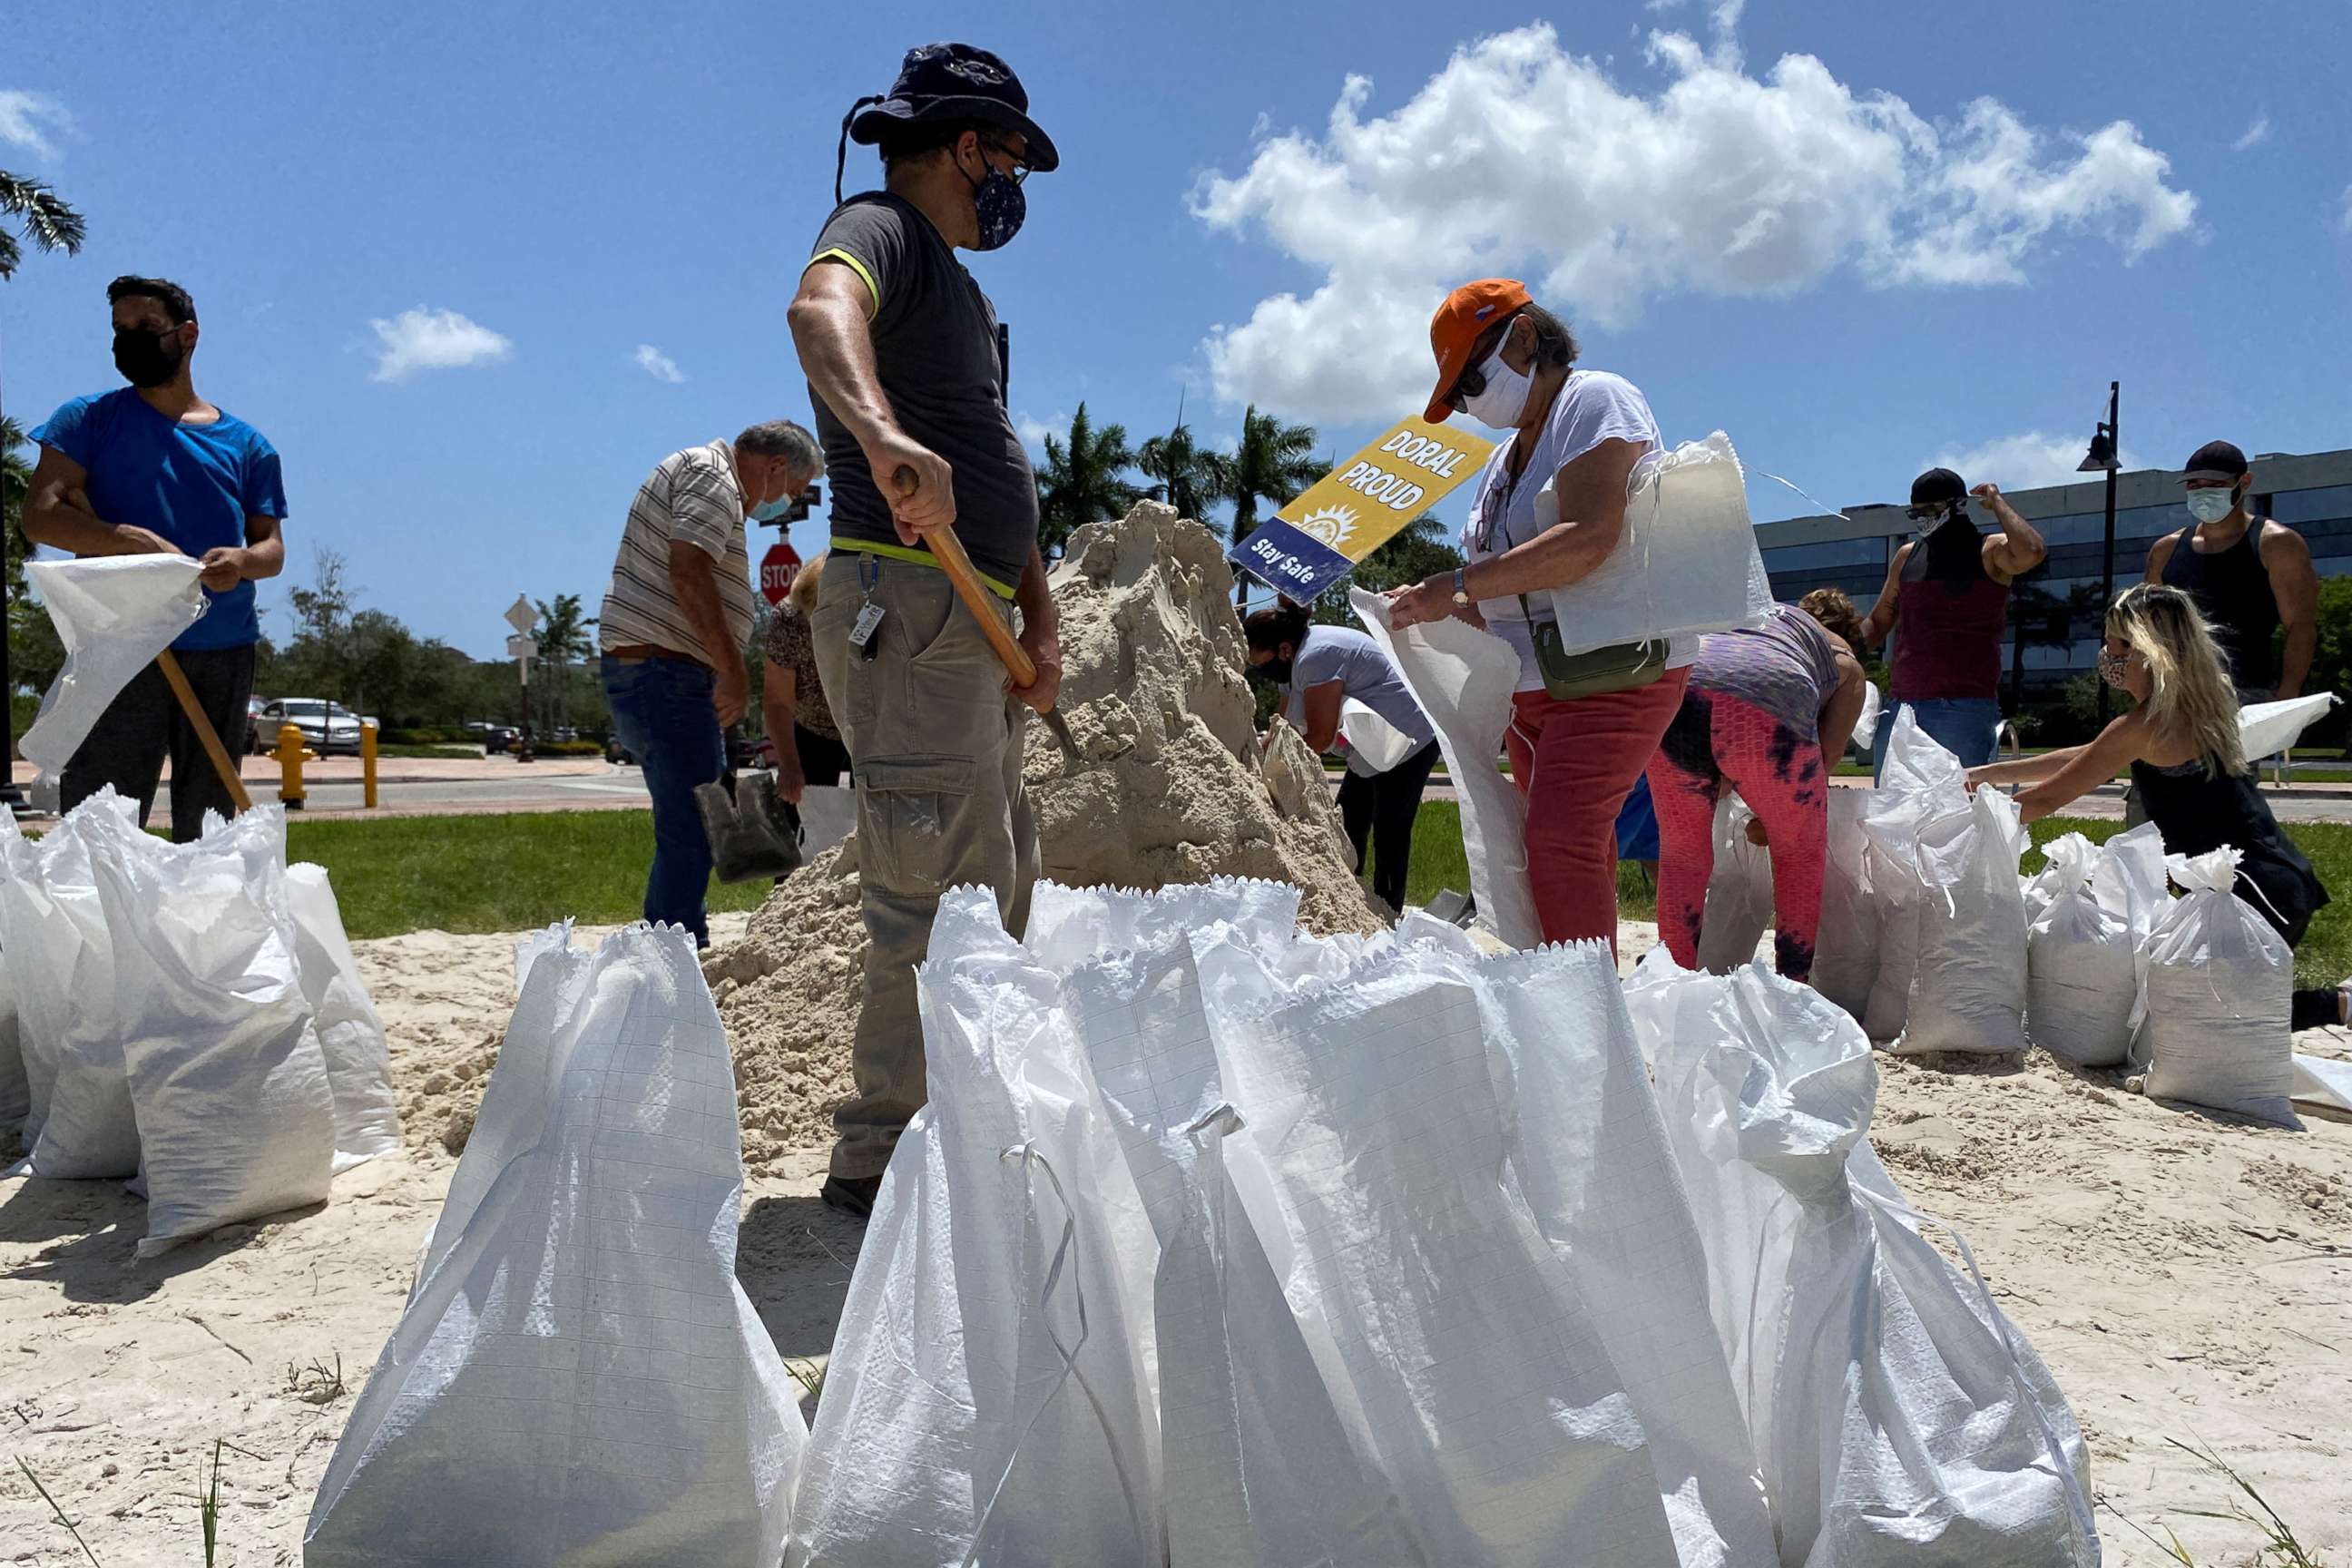 PHOTO: Residents fill and collect sand bags before the expected arrival of Hurricane Isaias in Doral, Fla., July 31, 2020.